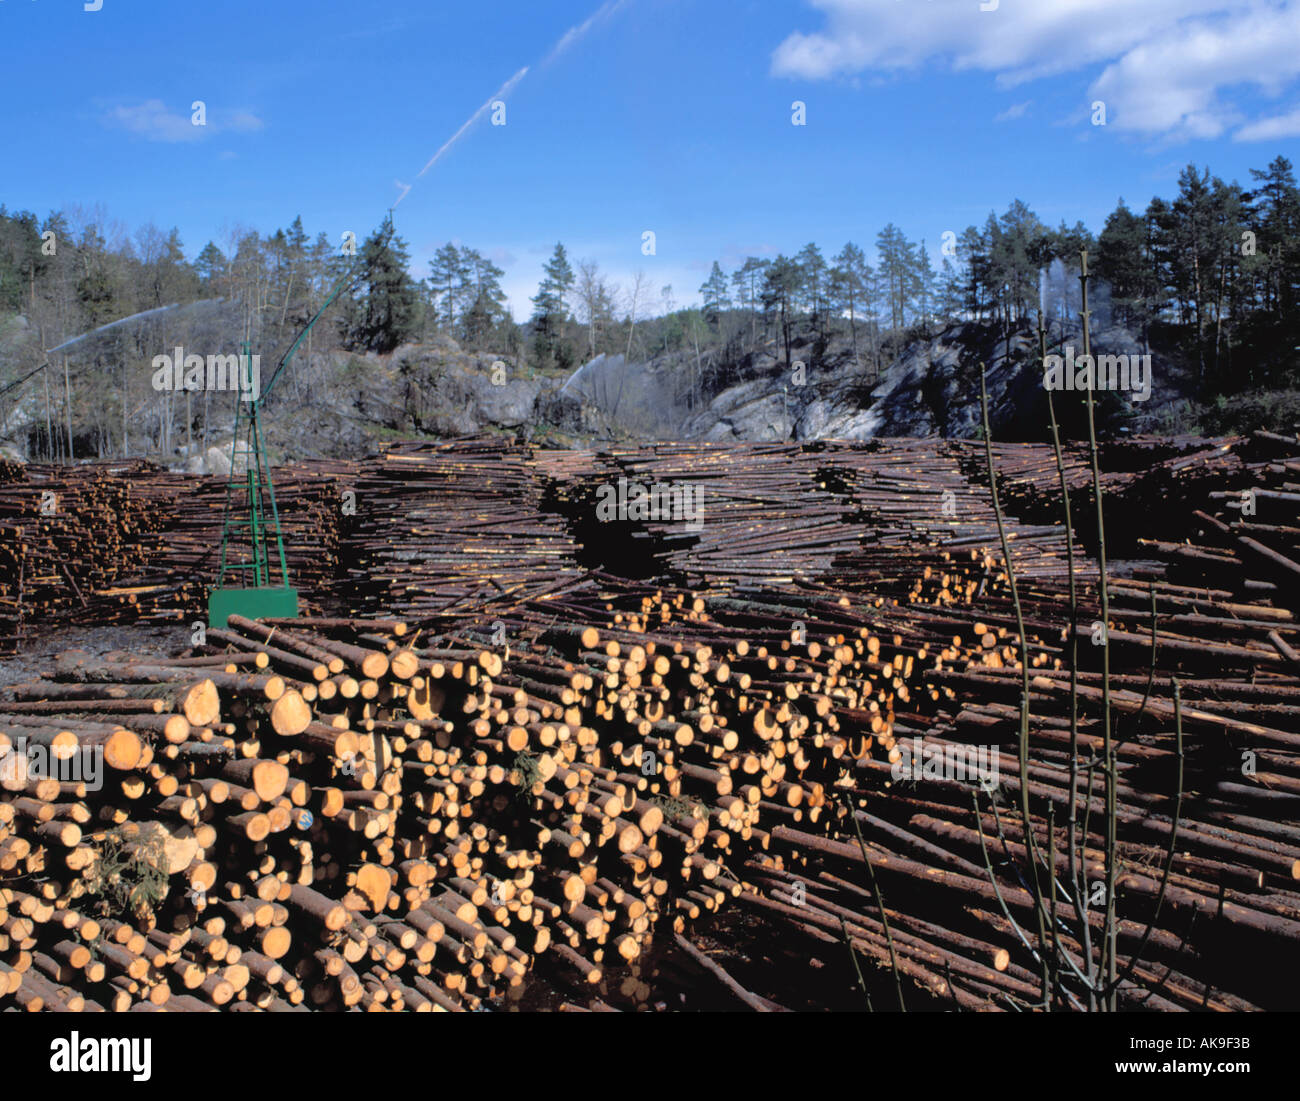 Stock piled logs being sprayed with water at a timber processing plant, Vadfoss, near Kragerø, Telemark, Norway. Stock Photo